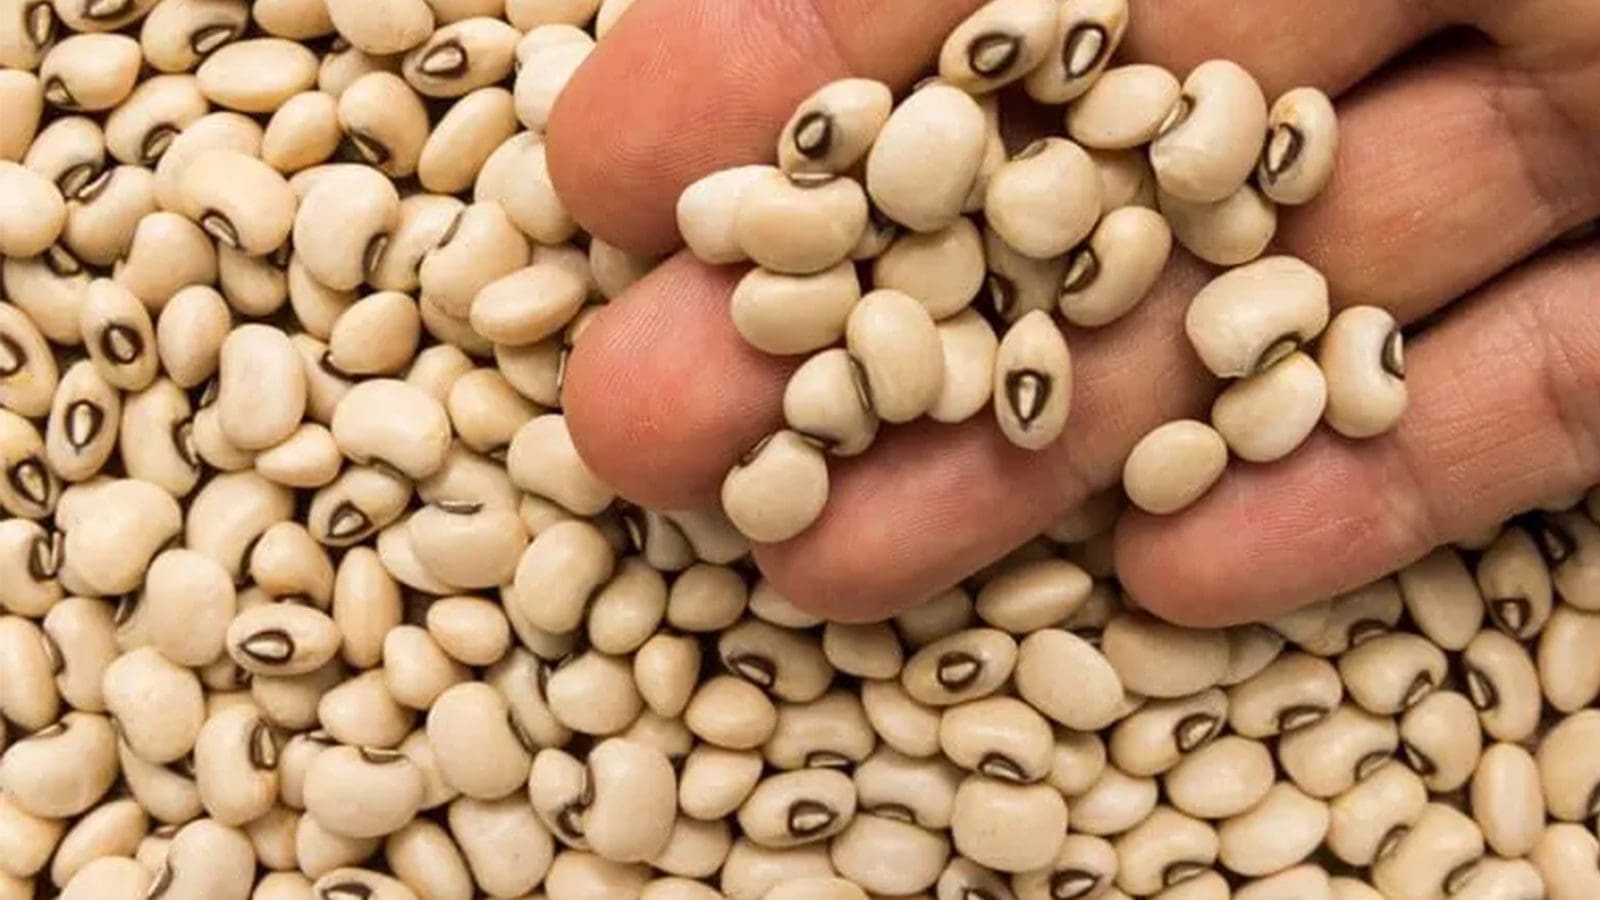 Ghana’s cowpea farmers call for swift approval of BT Cowpea variety